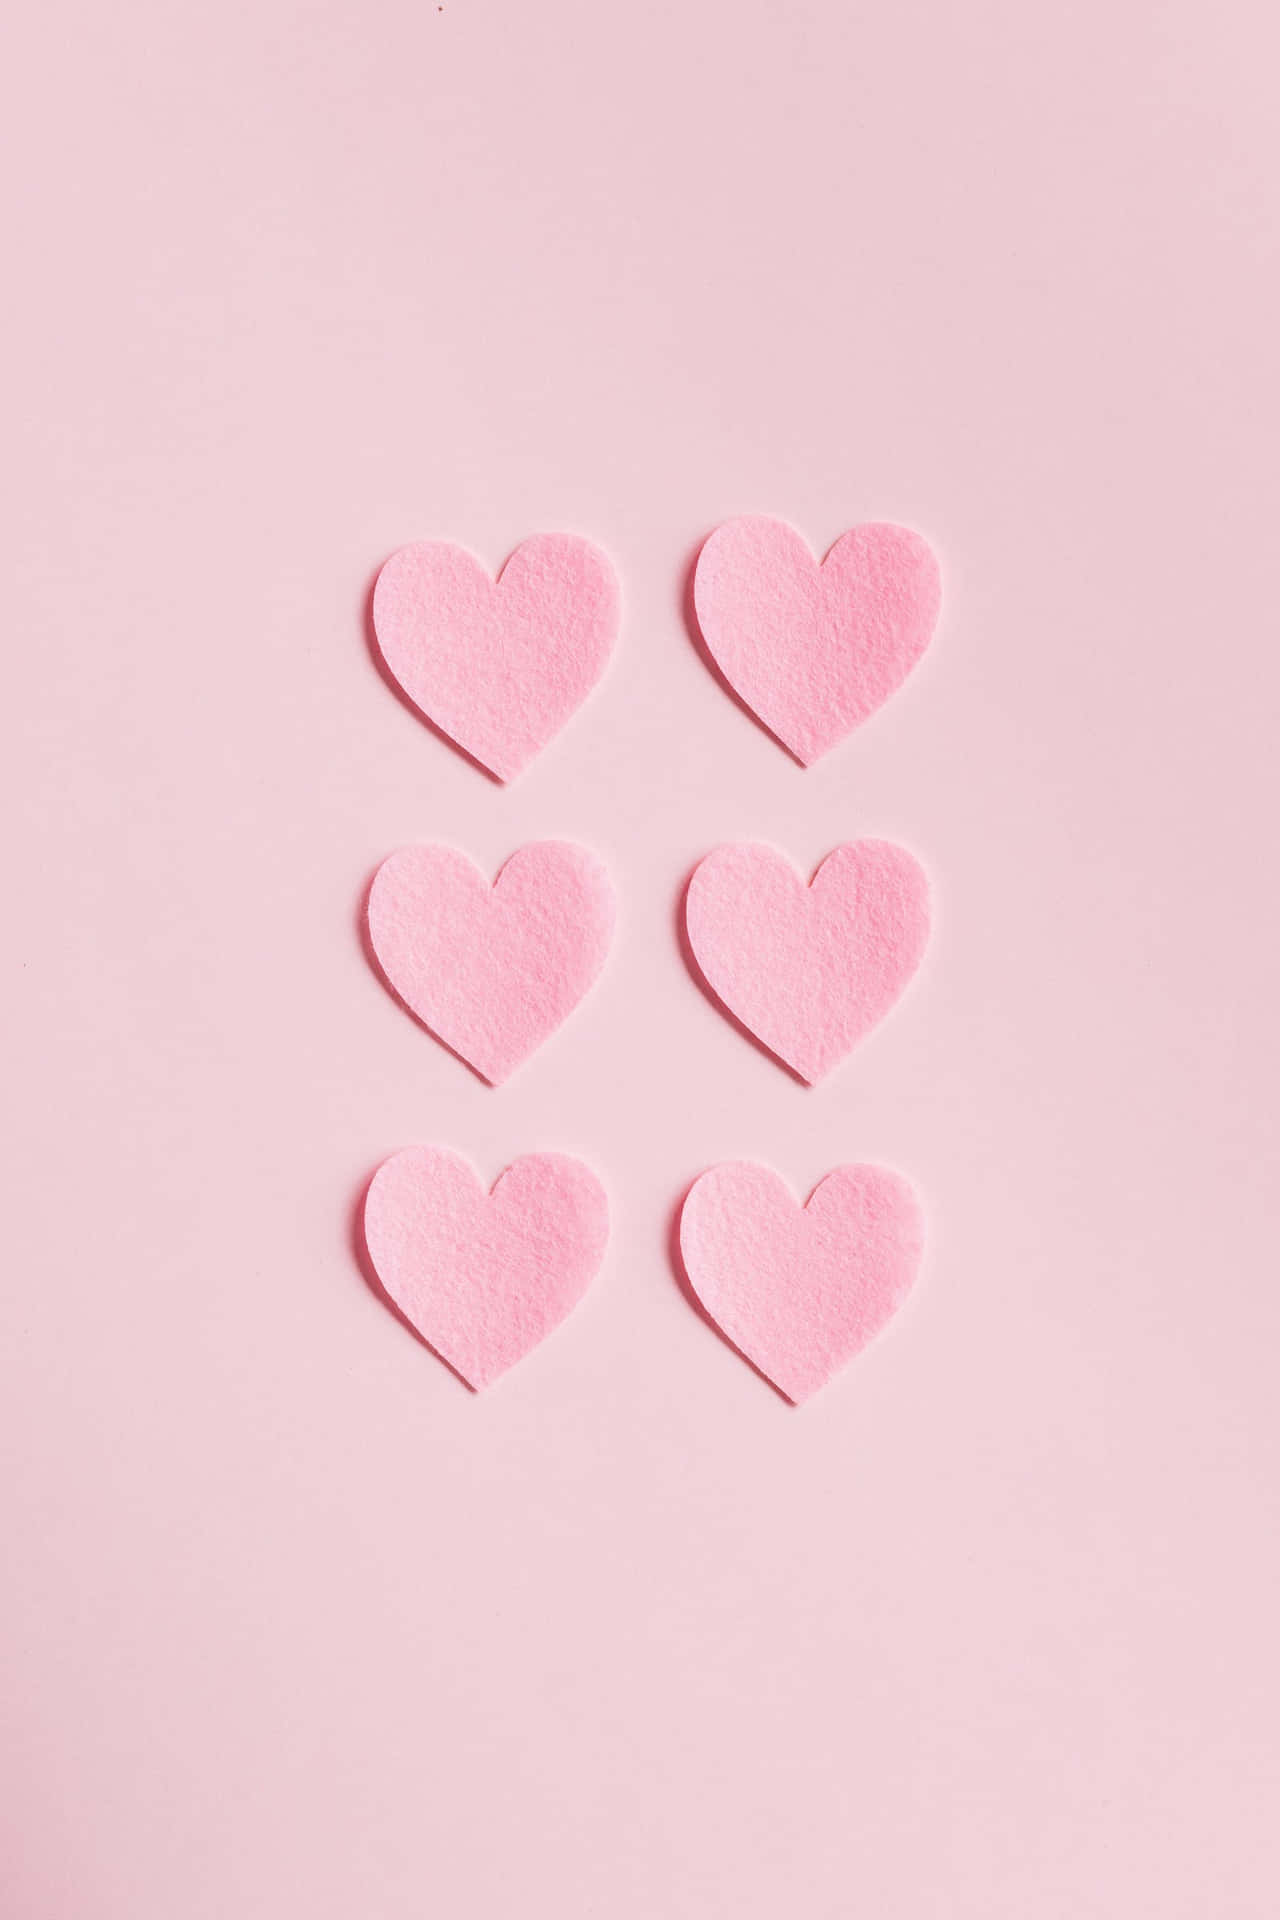 Pale Pink Background Hearts Vertically